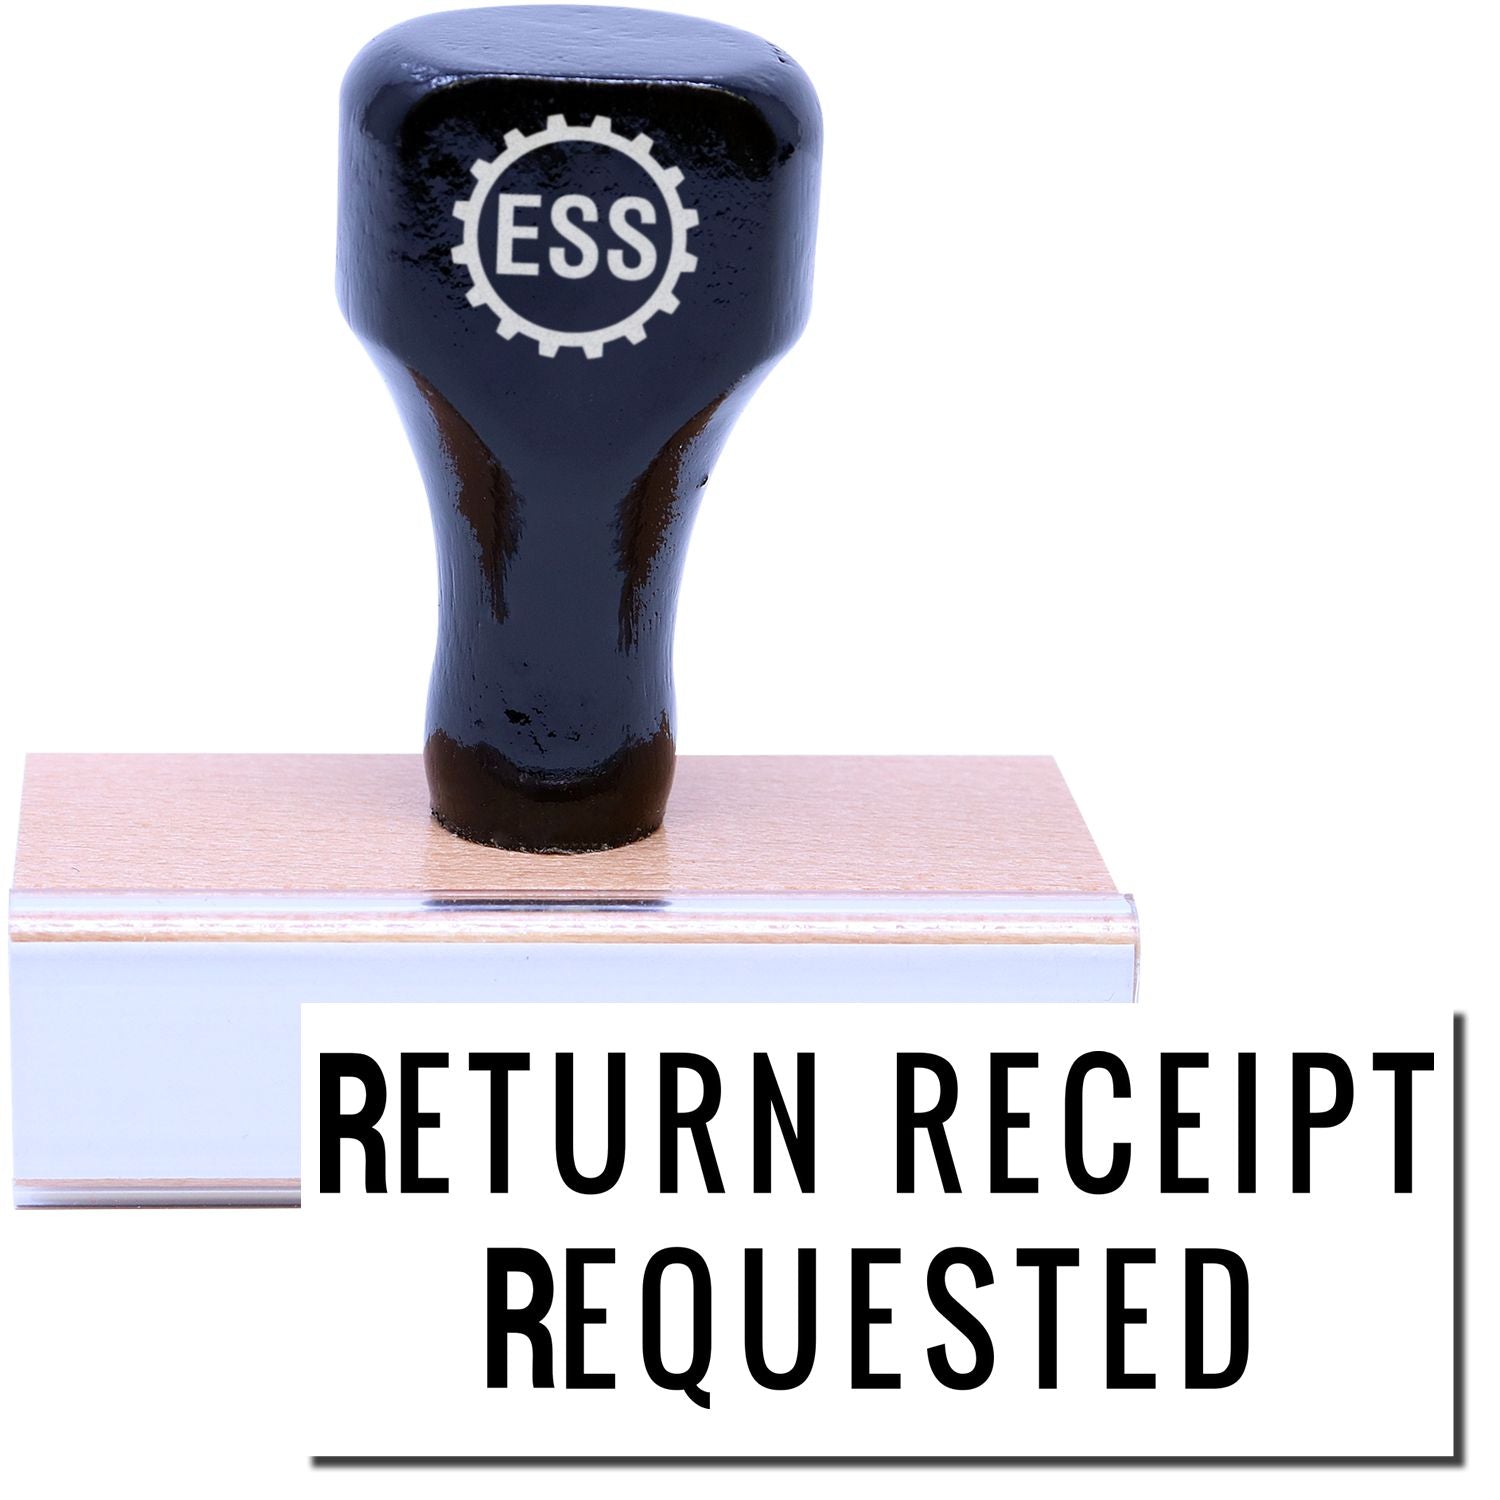 A stock office rubber stamp with a stamped image showing how the text "RETURN RECEIPT REQUESTED" in a large narrow font is displayed after stamping.